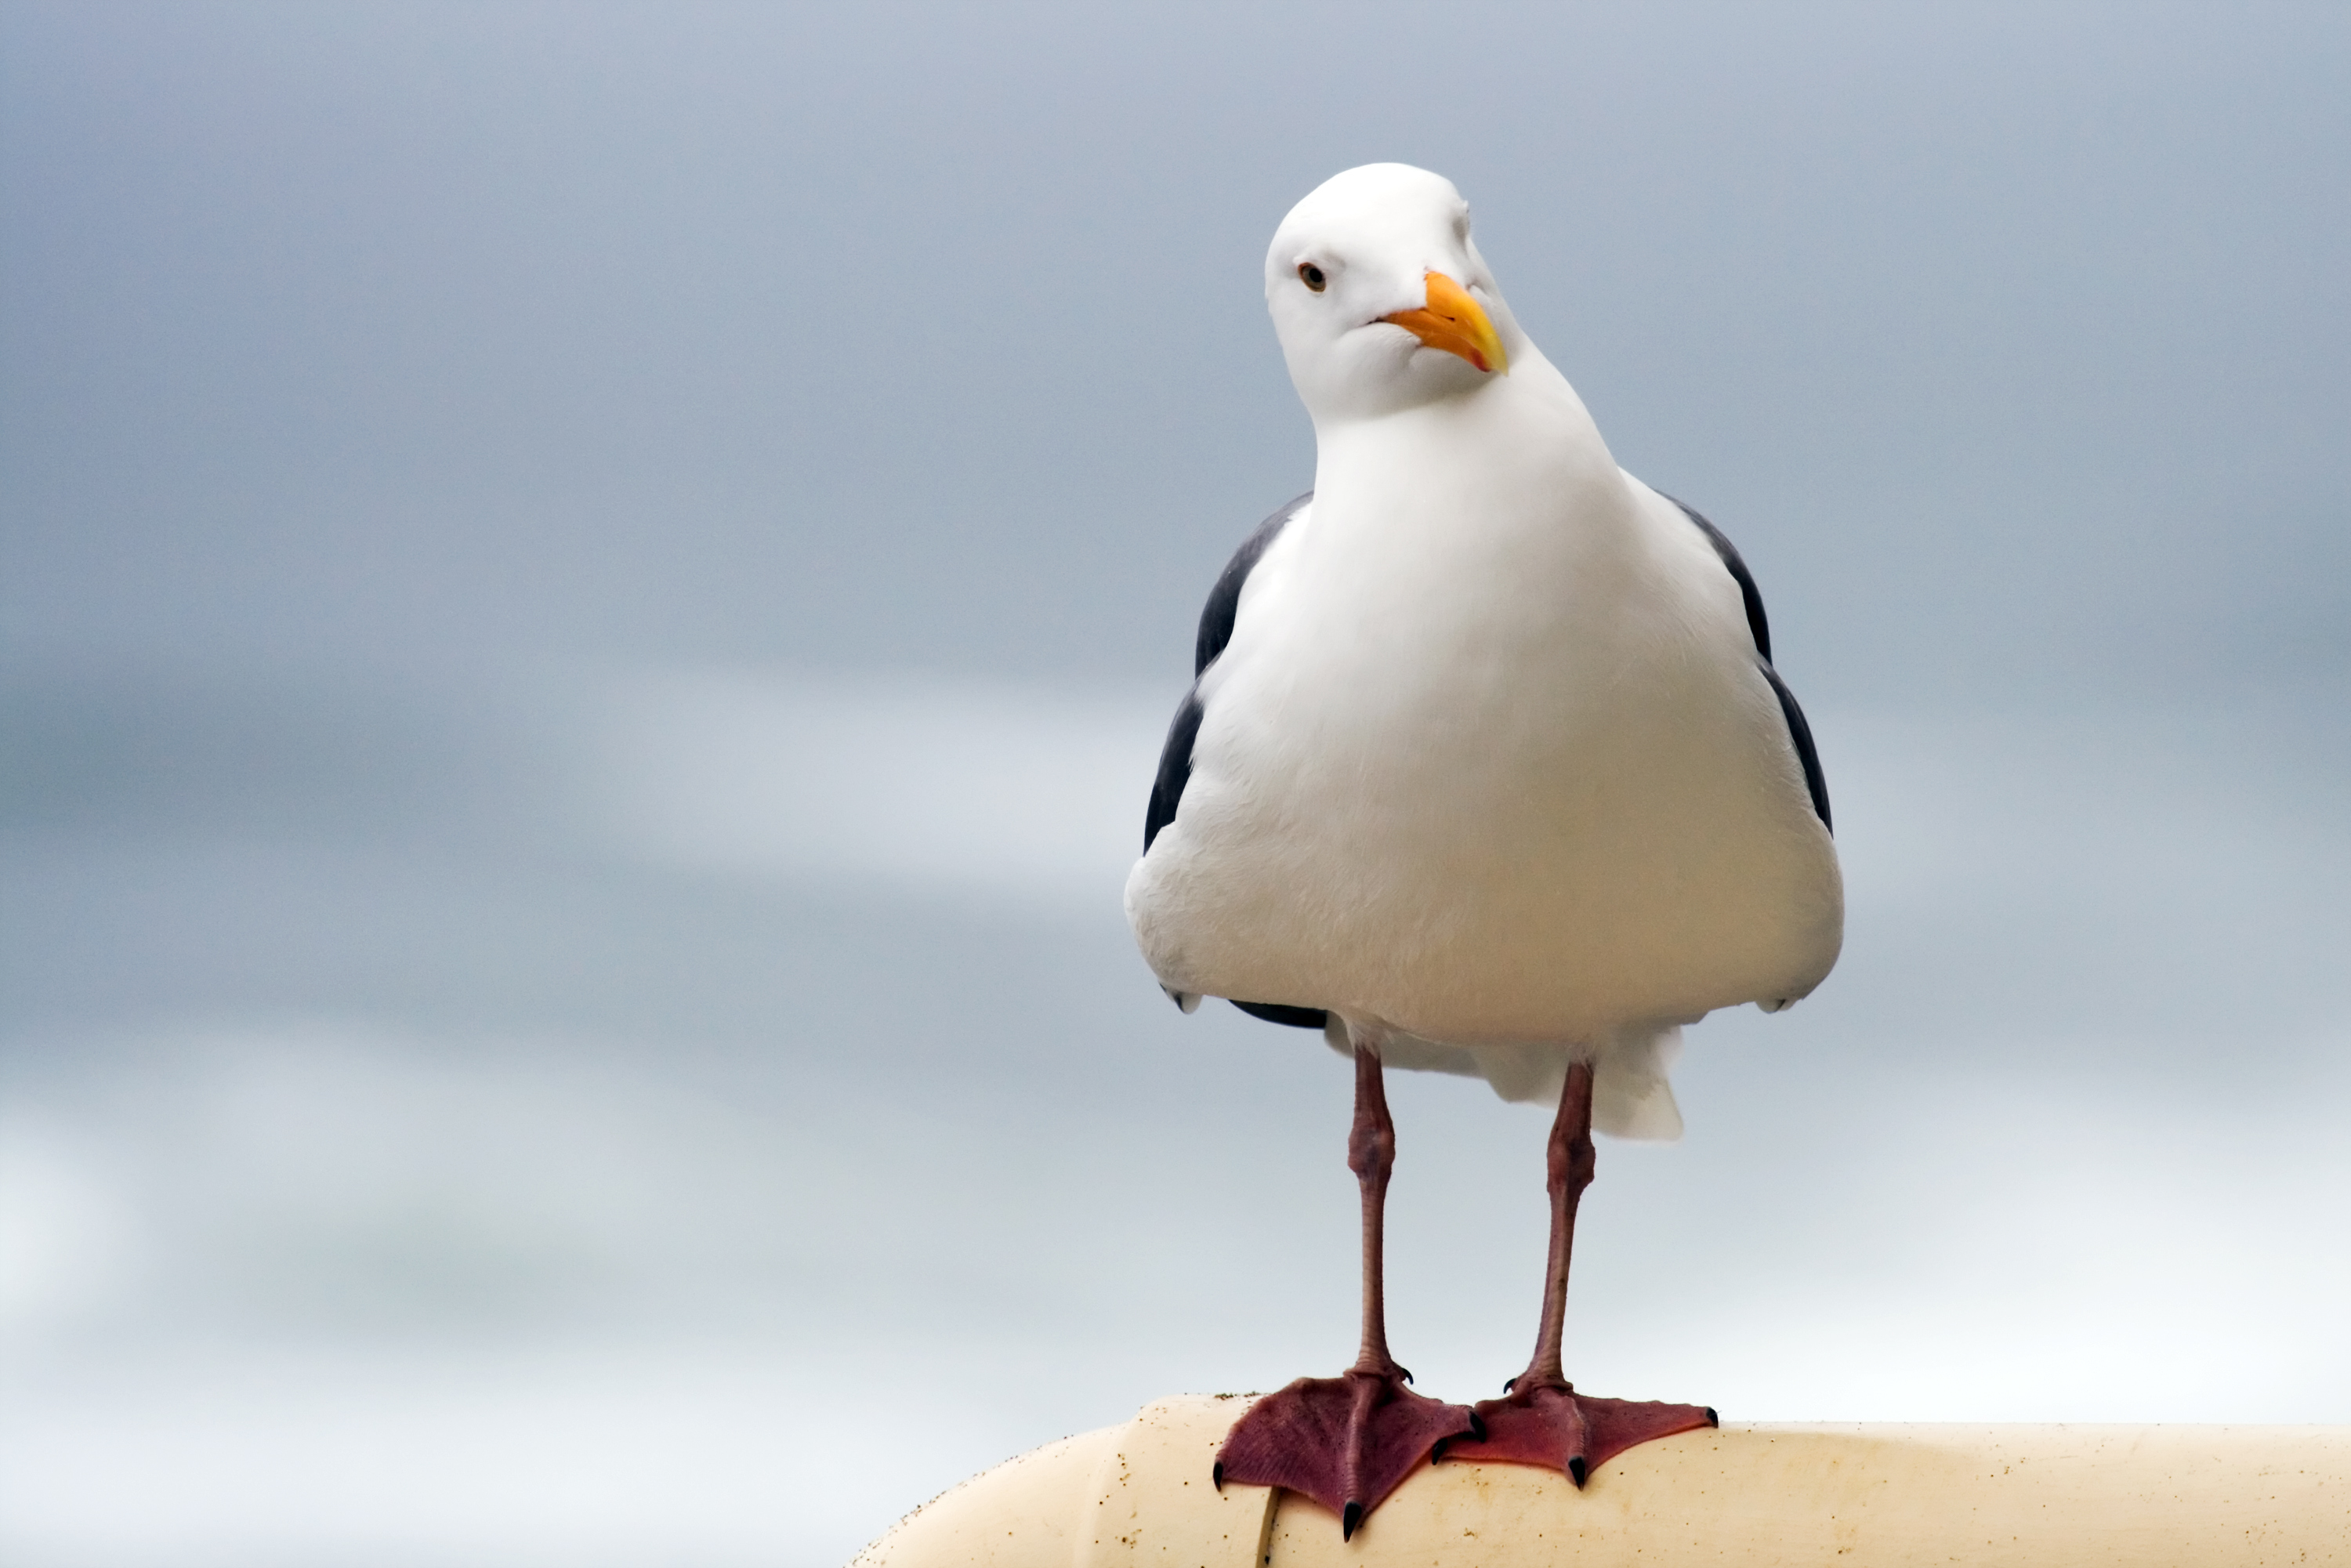 A seagull perched on the edge of a pipe